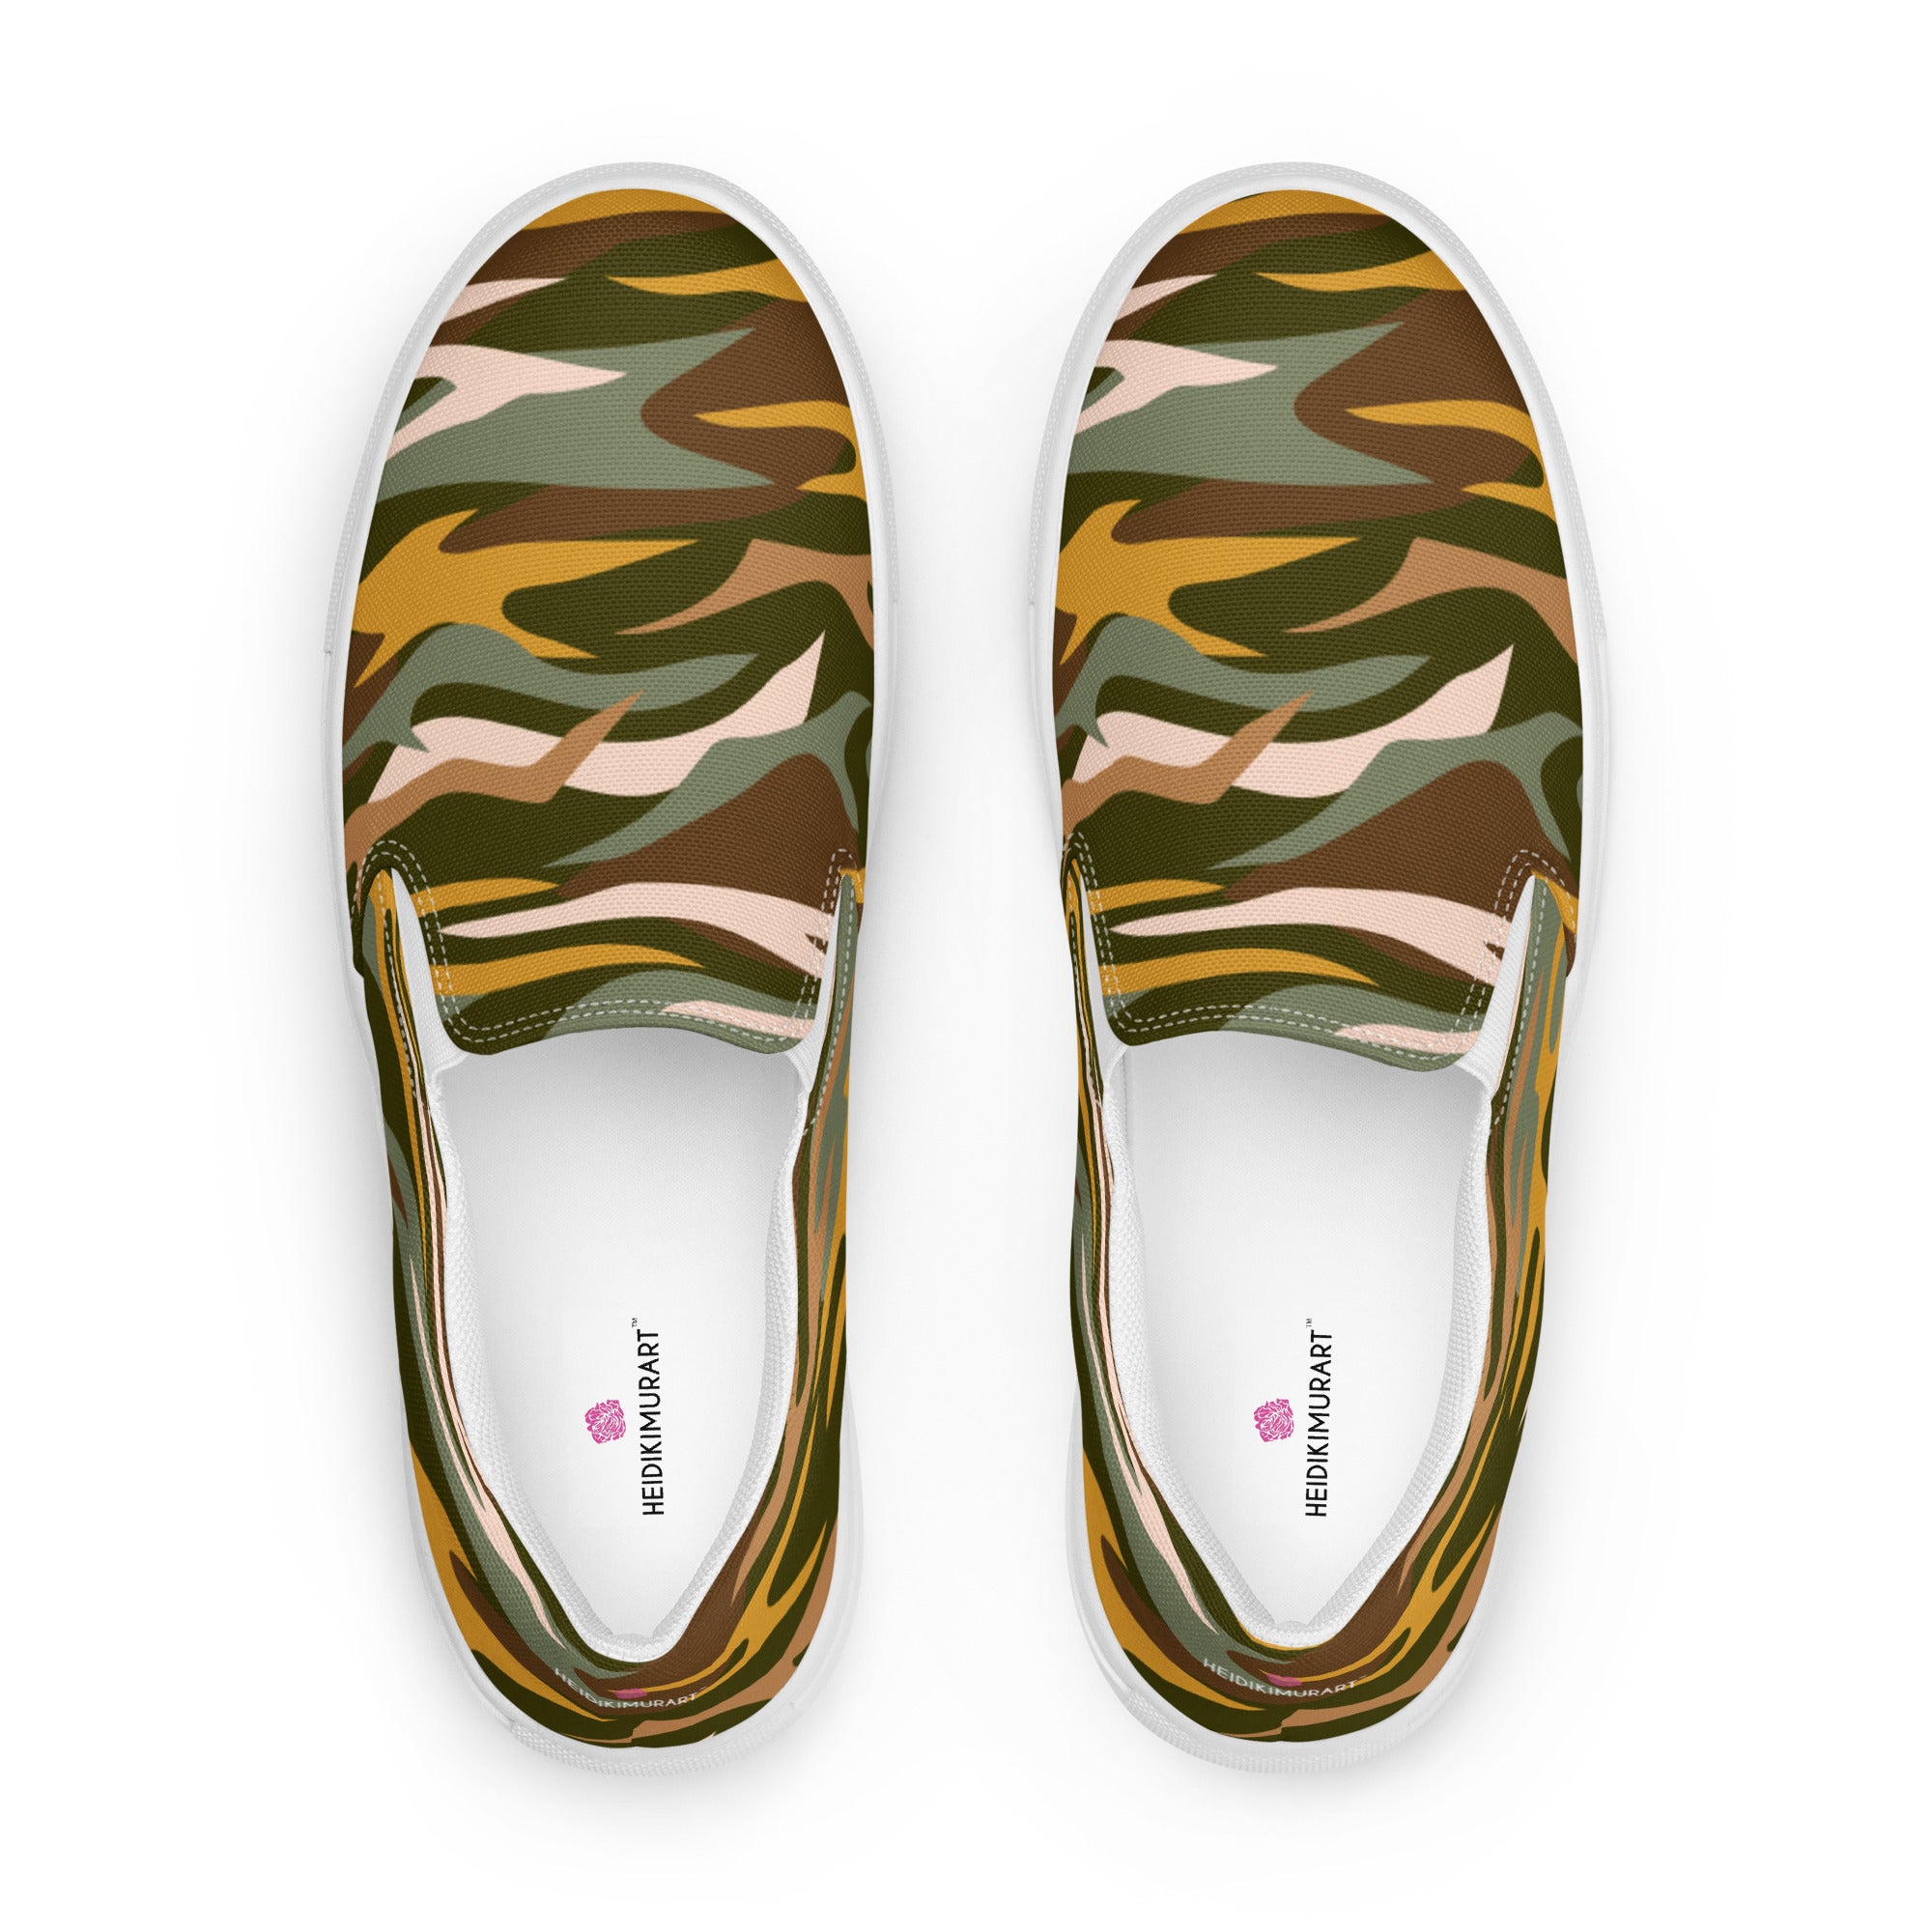 Camo Print Women's Sneakers, Green Brown Camouflaged Classic Modern Minimalist Women’s Premium High Quality Luxury Style Slip-On Canvas Shoes (US Size: 5-12) Camouflage Sneakers for Women, Slip-On Padded Breathable Loafer Shoes Footwear, Ladies Canvas Shoes, Camouflage Sneakers, Camouflage Shoes 